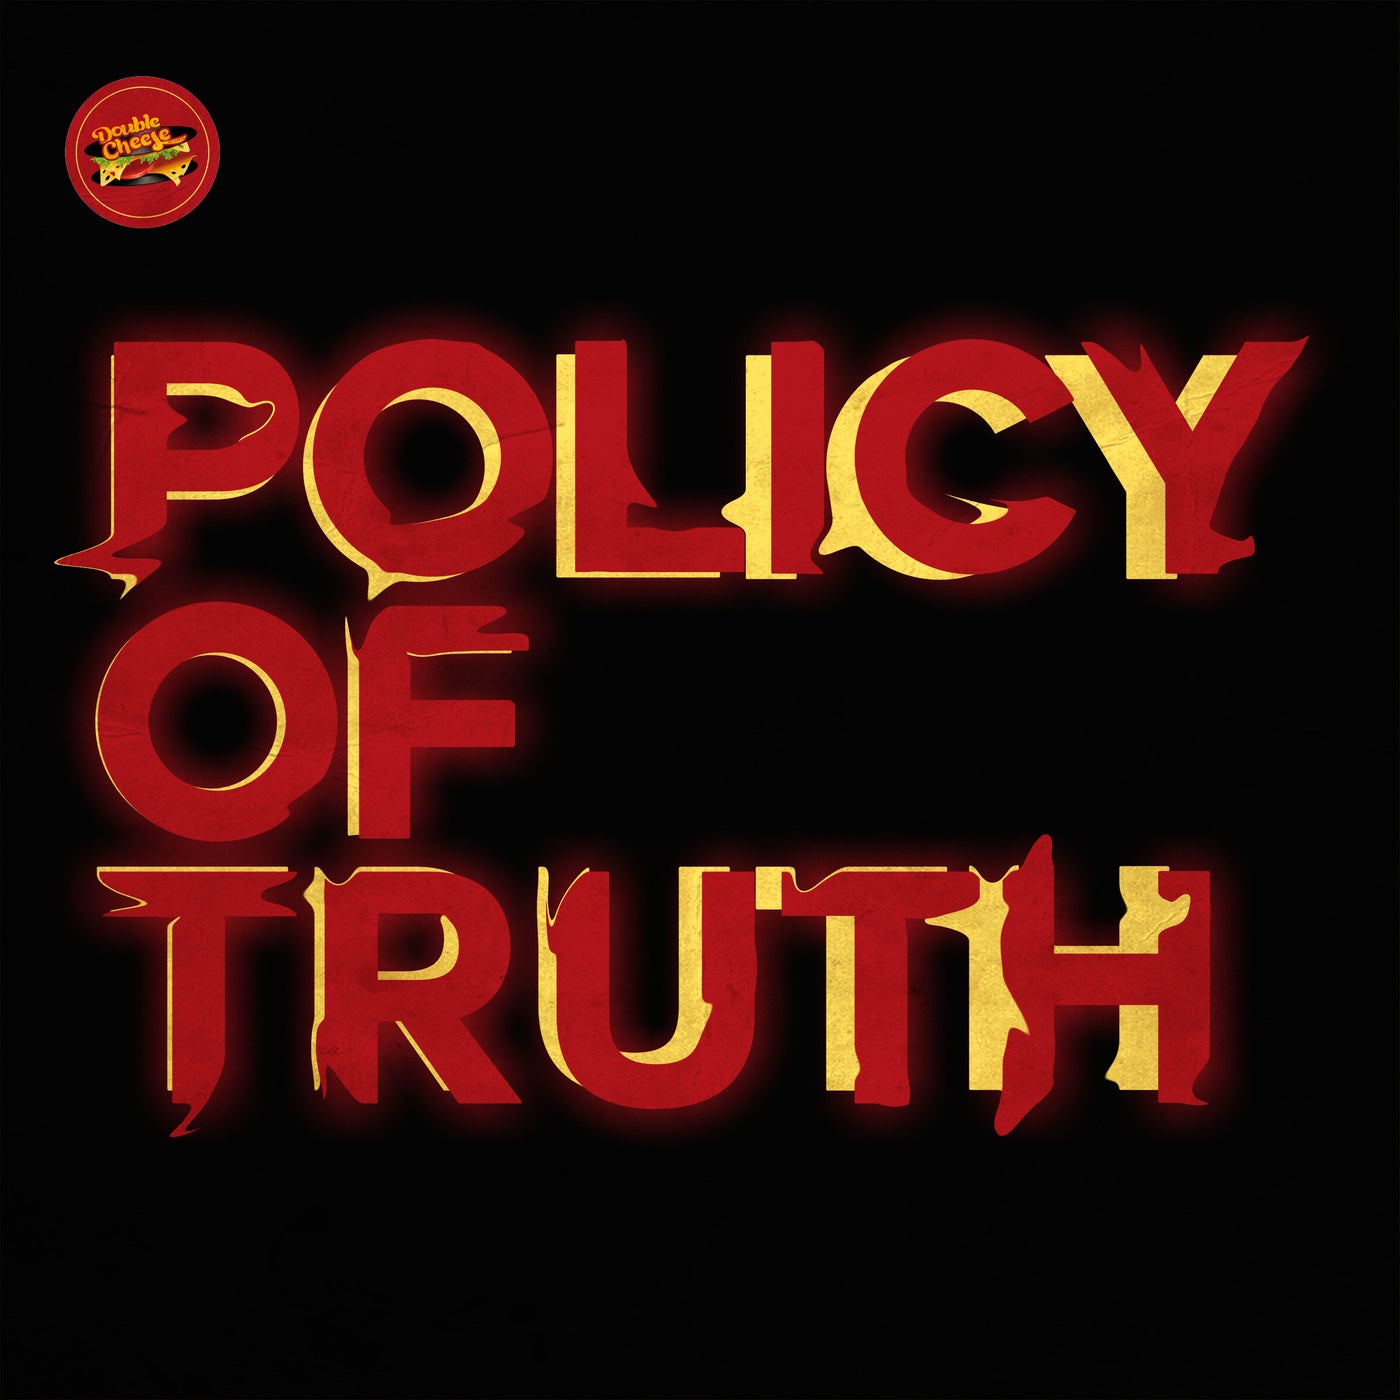 Policy of Truth